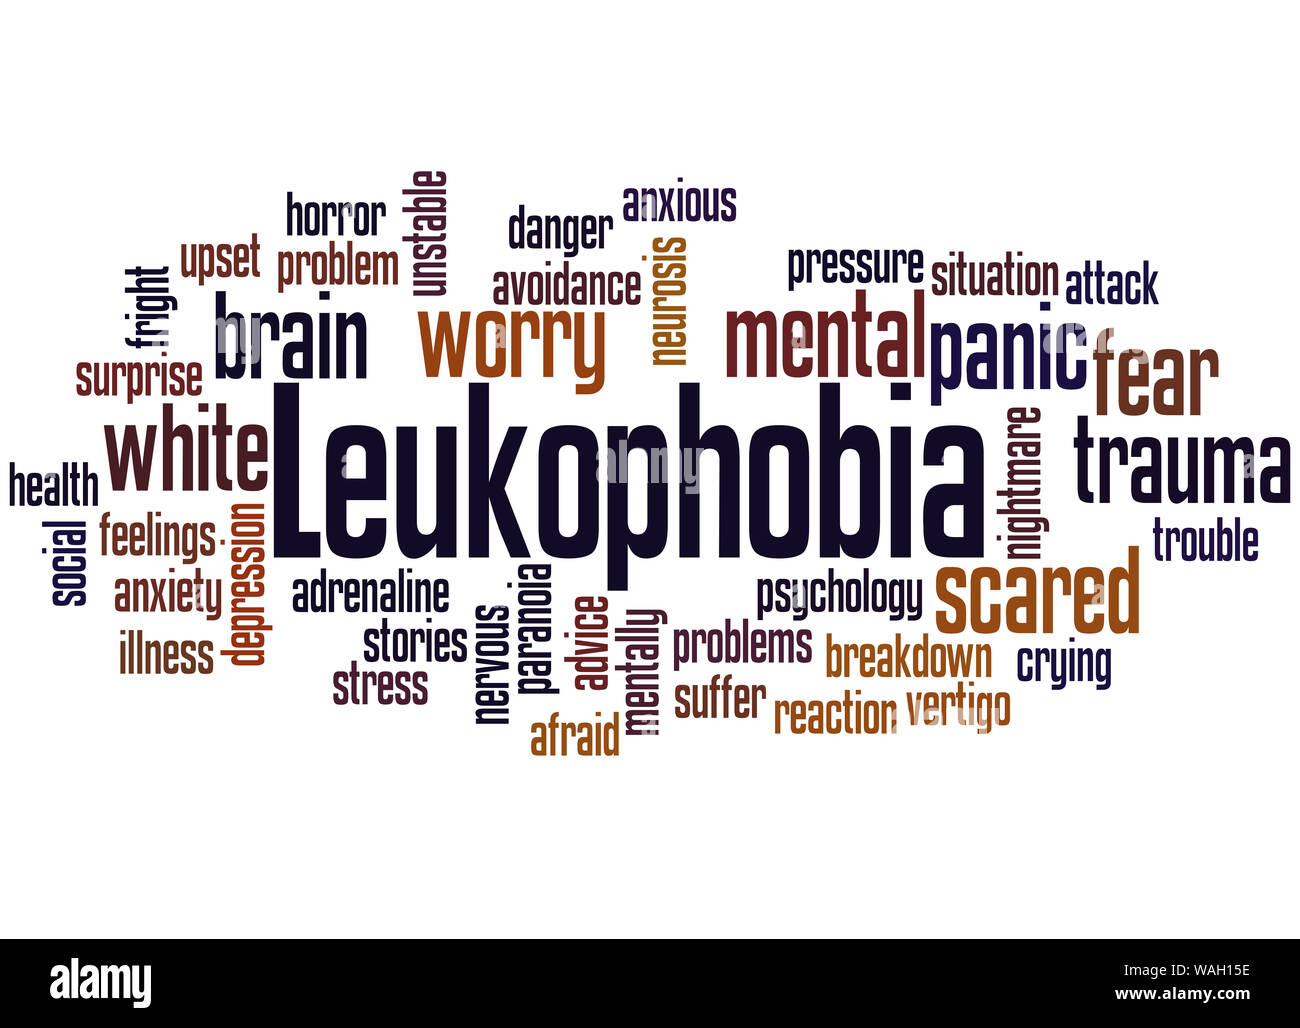 Leukophobia fear of the color white word cloud concept on white background. Stock Photo